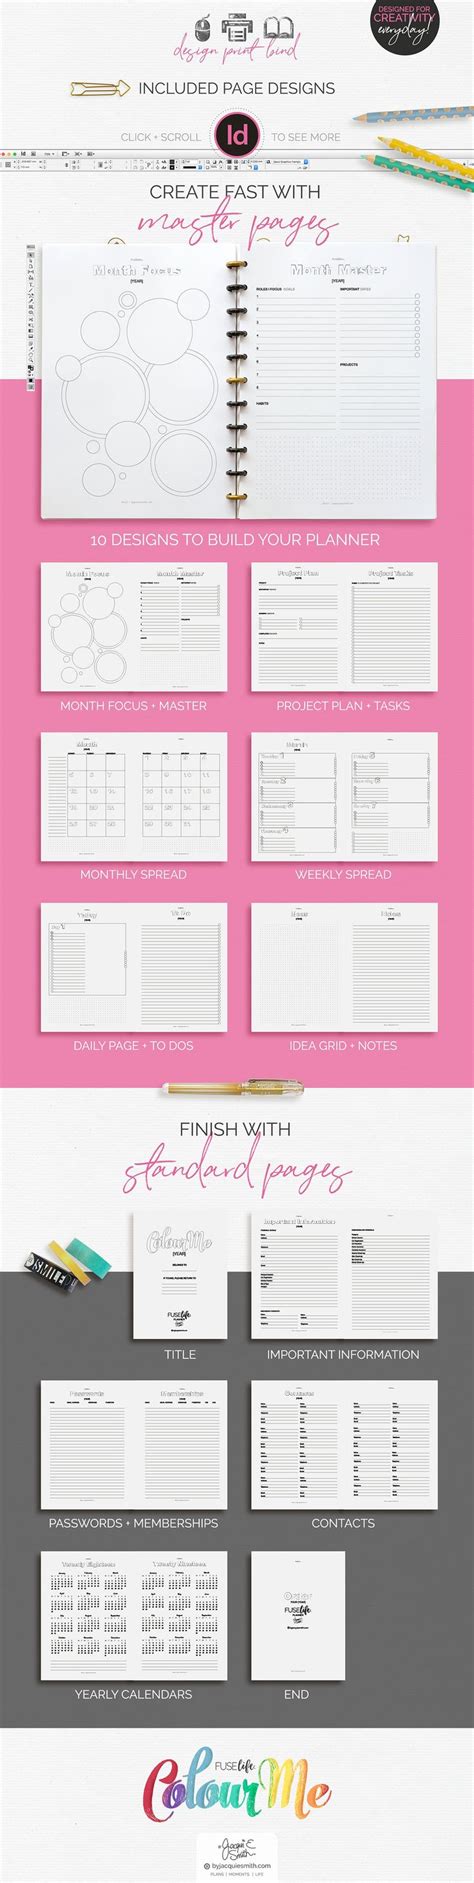 A4 Indesign Planner Template Colorme Planner Template Planner Business Planner